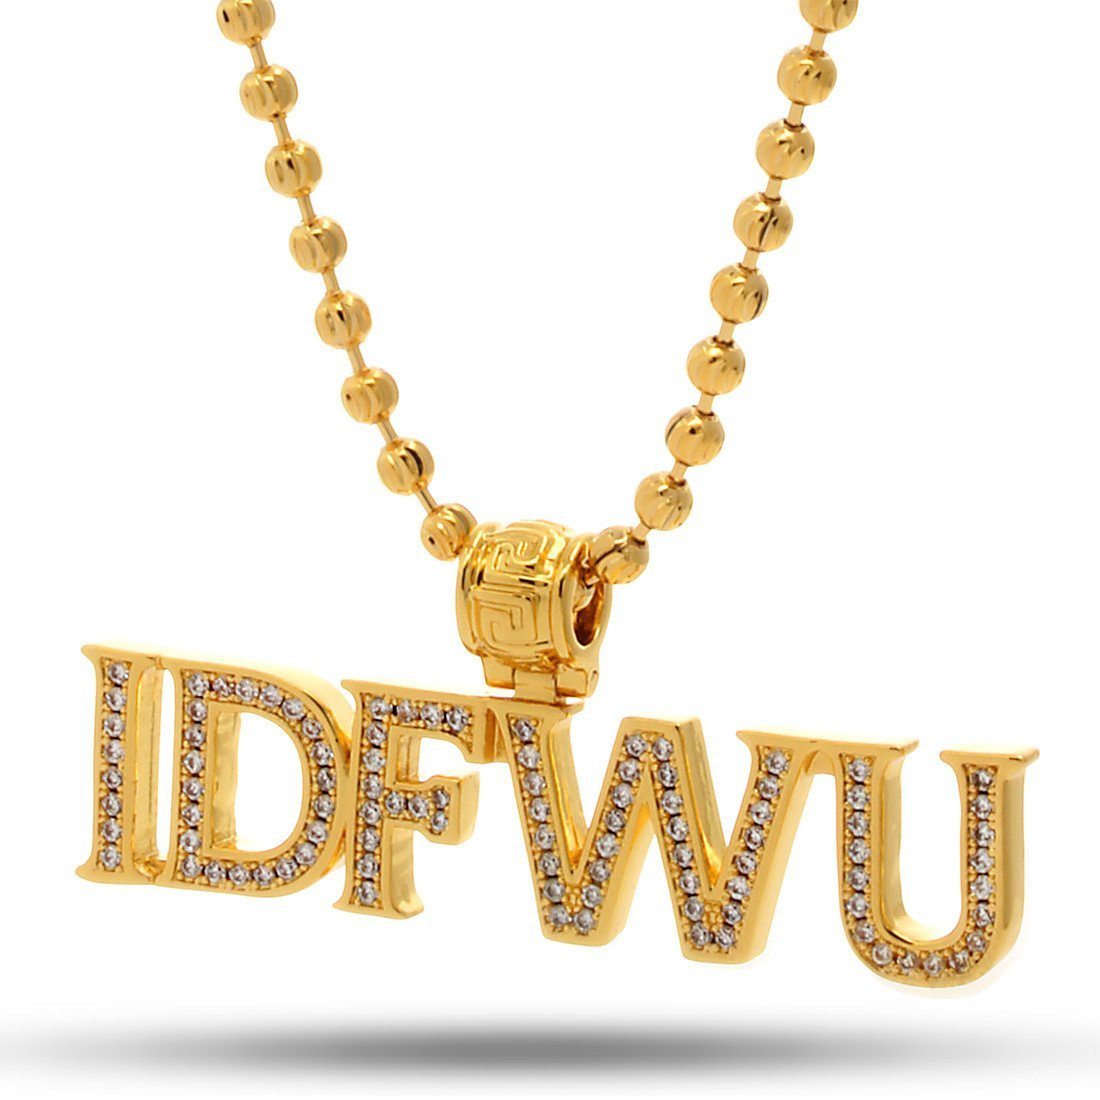 Image of The IDFWU Necklace - Designed by Snoop Dogg x King Ice